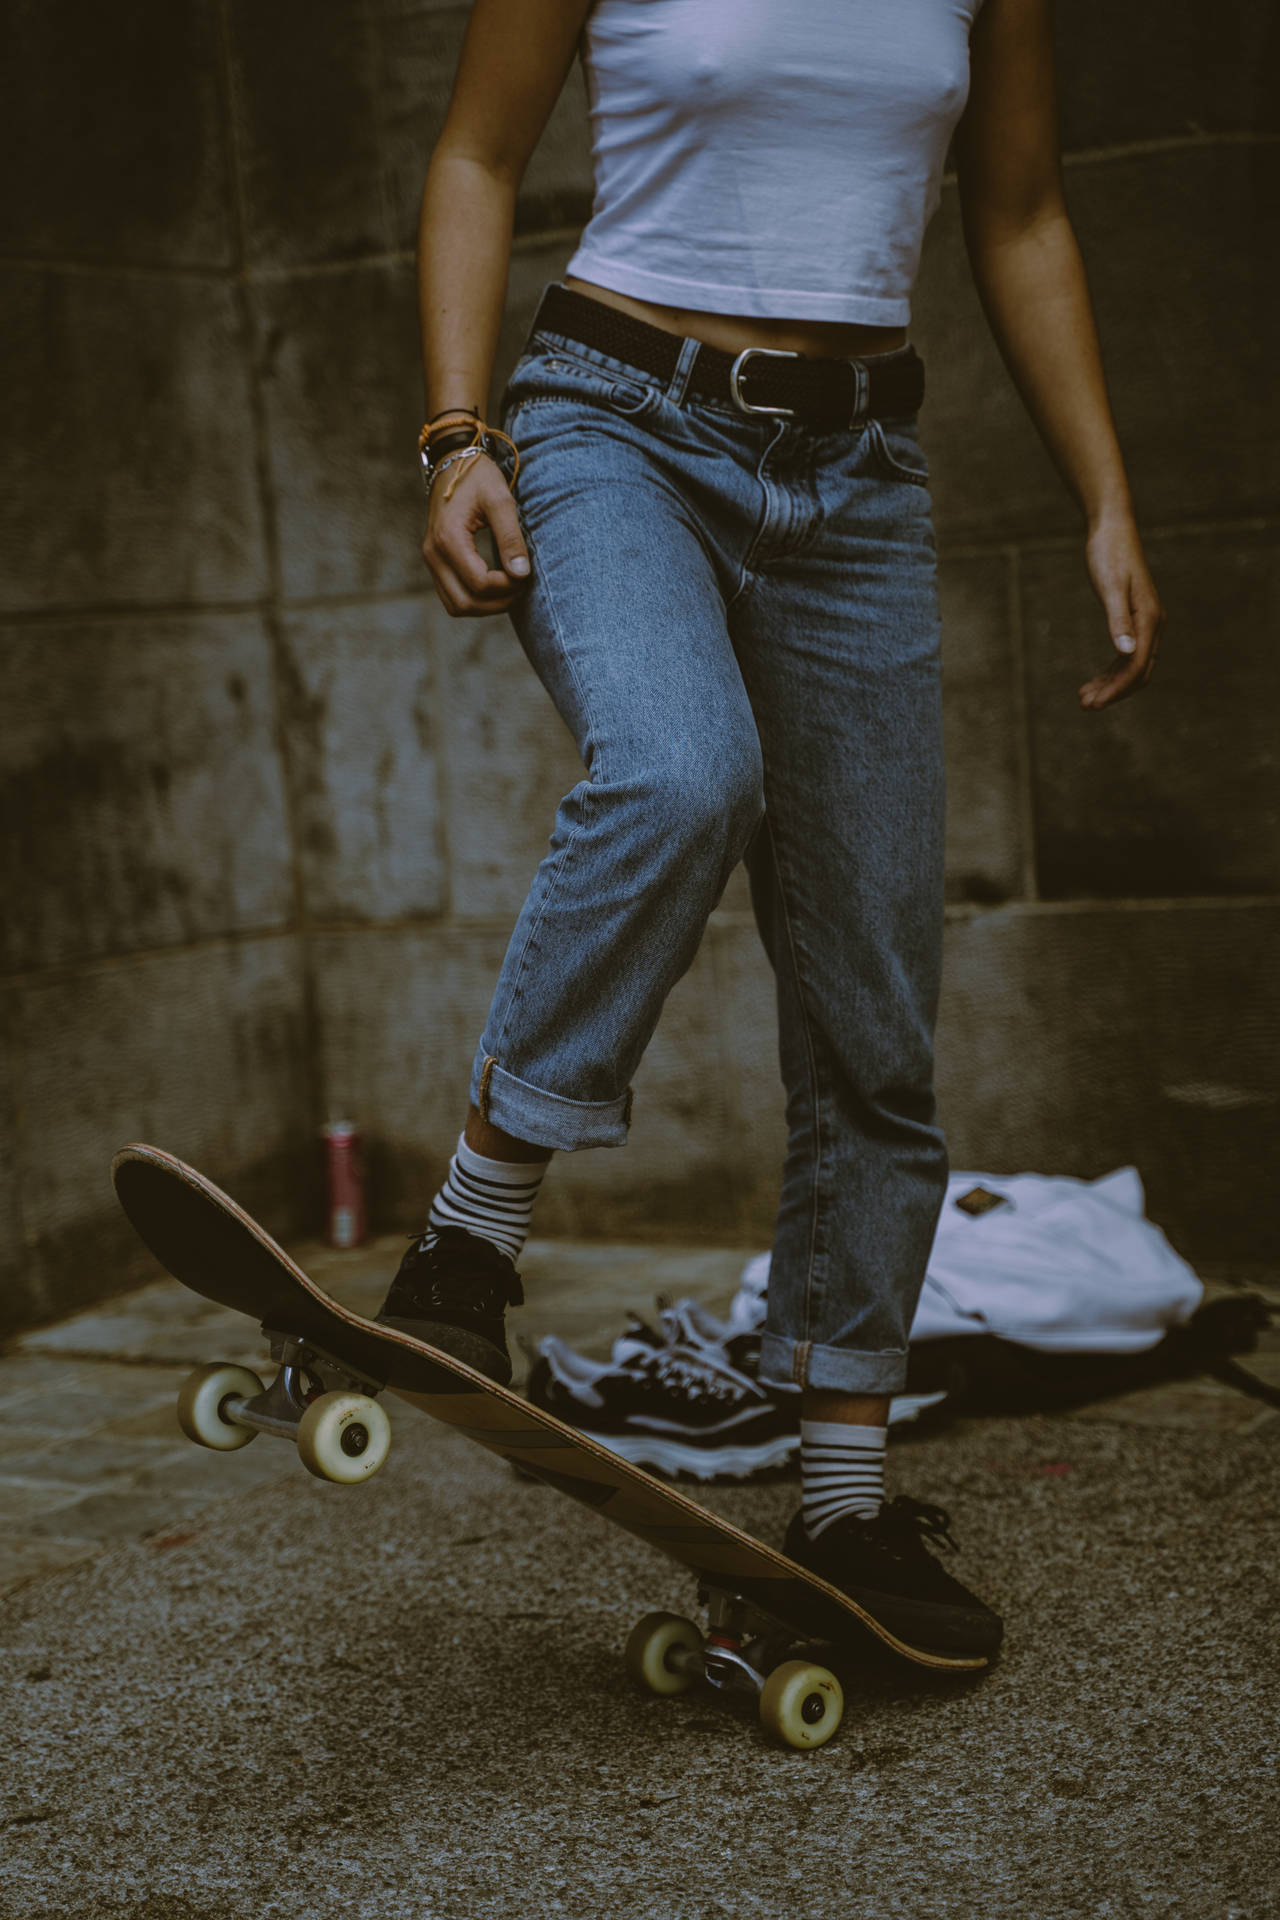 Ready for an exciting skateboard ride. Wallpaper